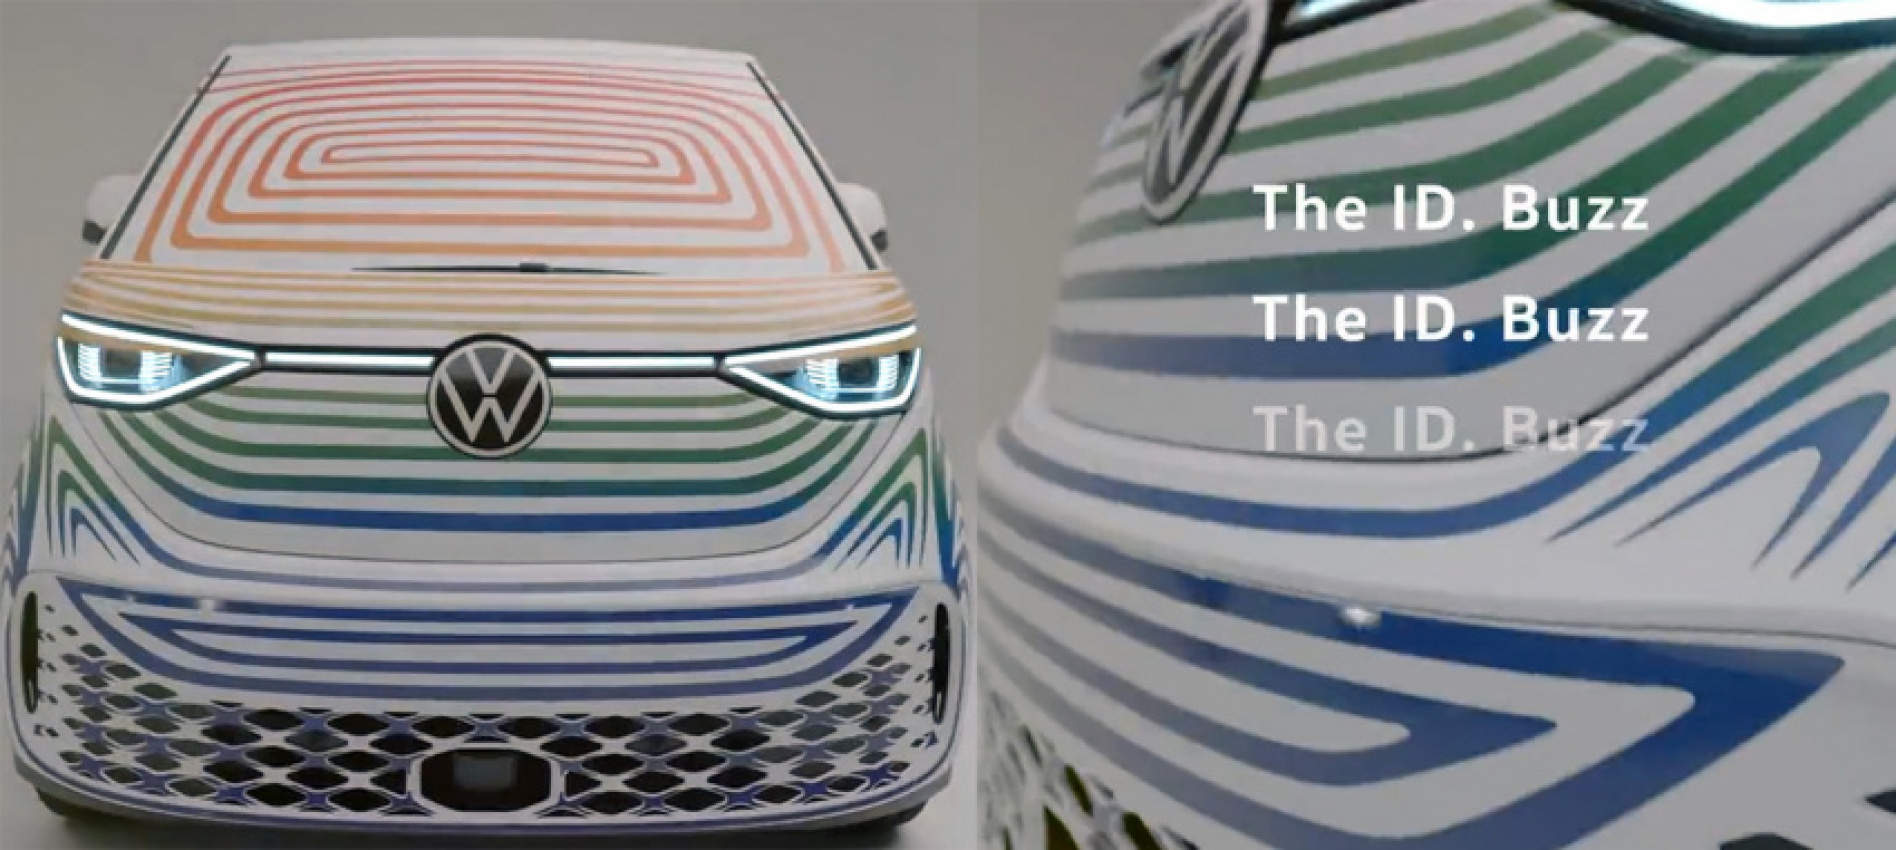 autos, cars, electric, news, volkswagen, electric cars, volkswagen id.buzz, volkswagen id buzz shown in public ahead of reveal